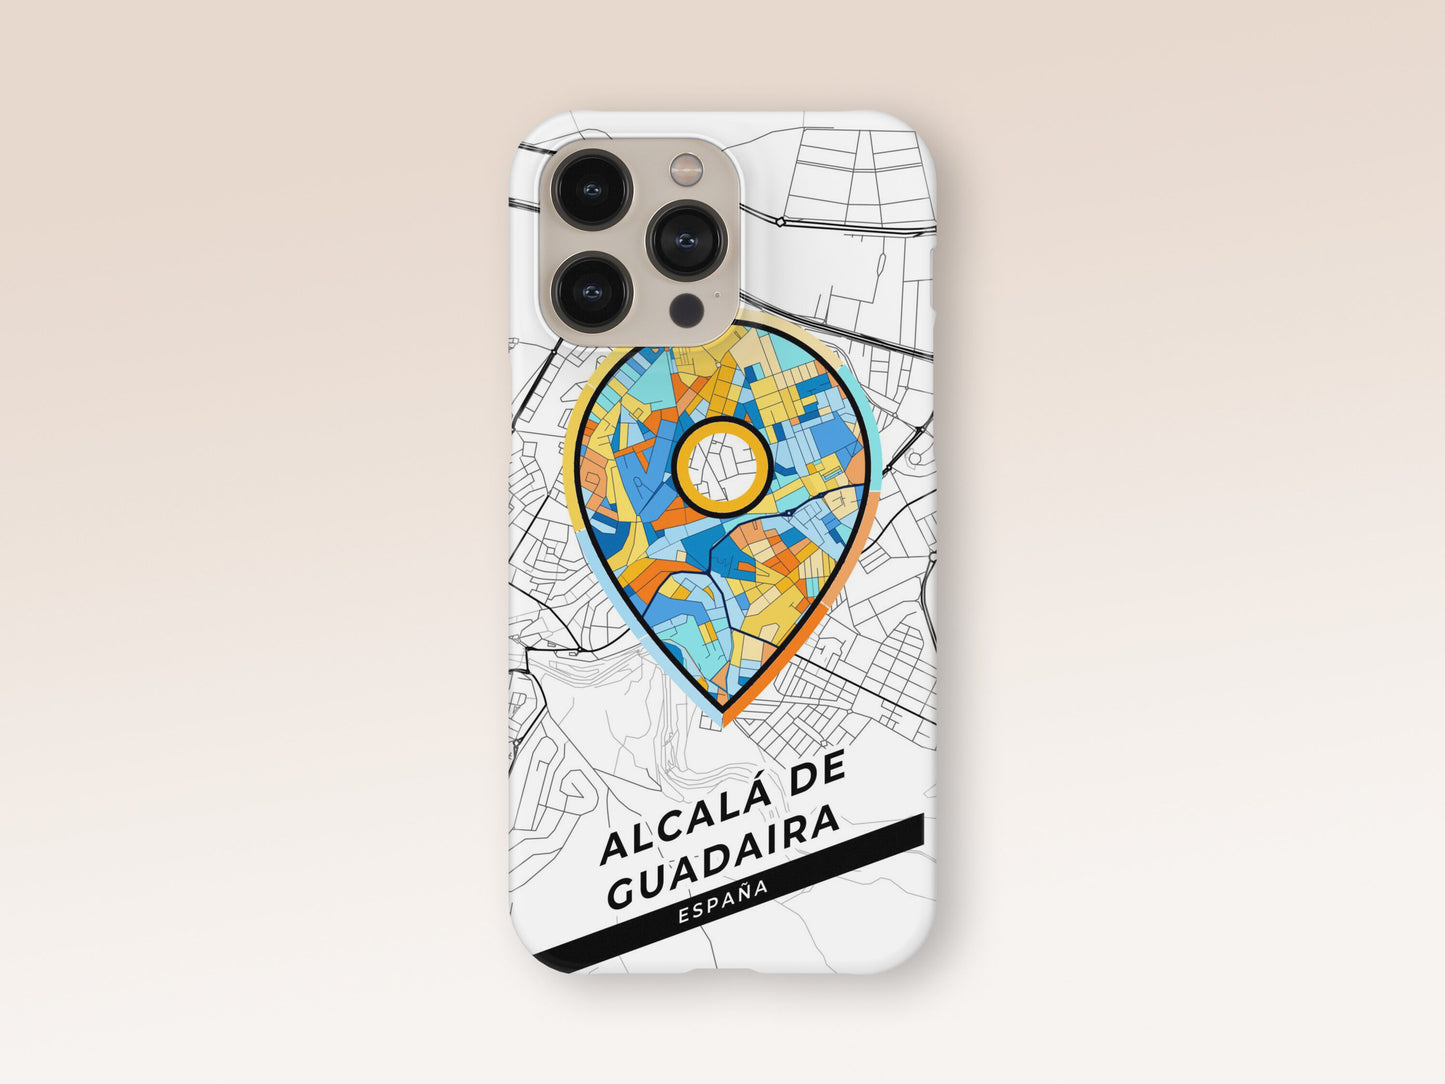 Alcalá De Guadaira Spain slim phone case with colorful icon. Birthday, wedding or housewarming gift. Couple match cases. 1